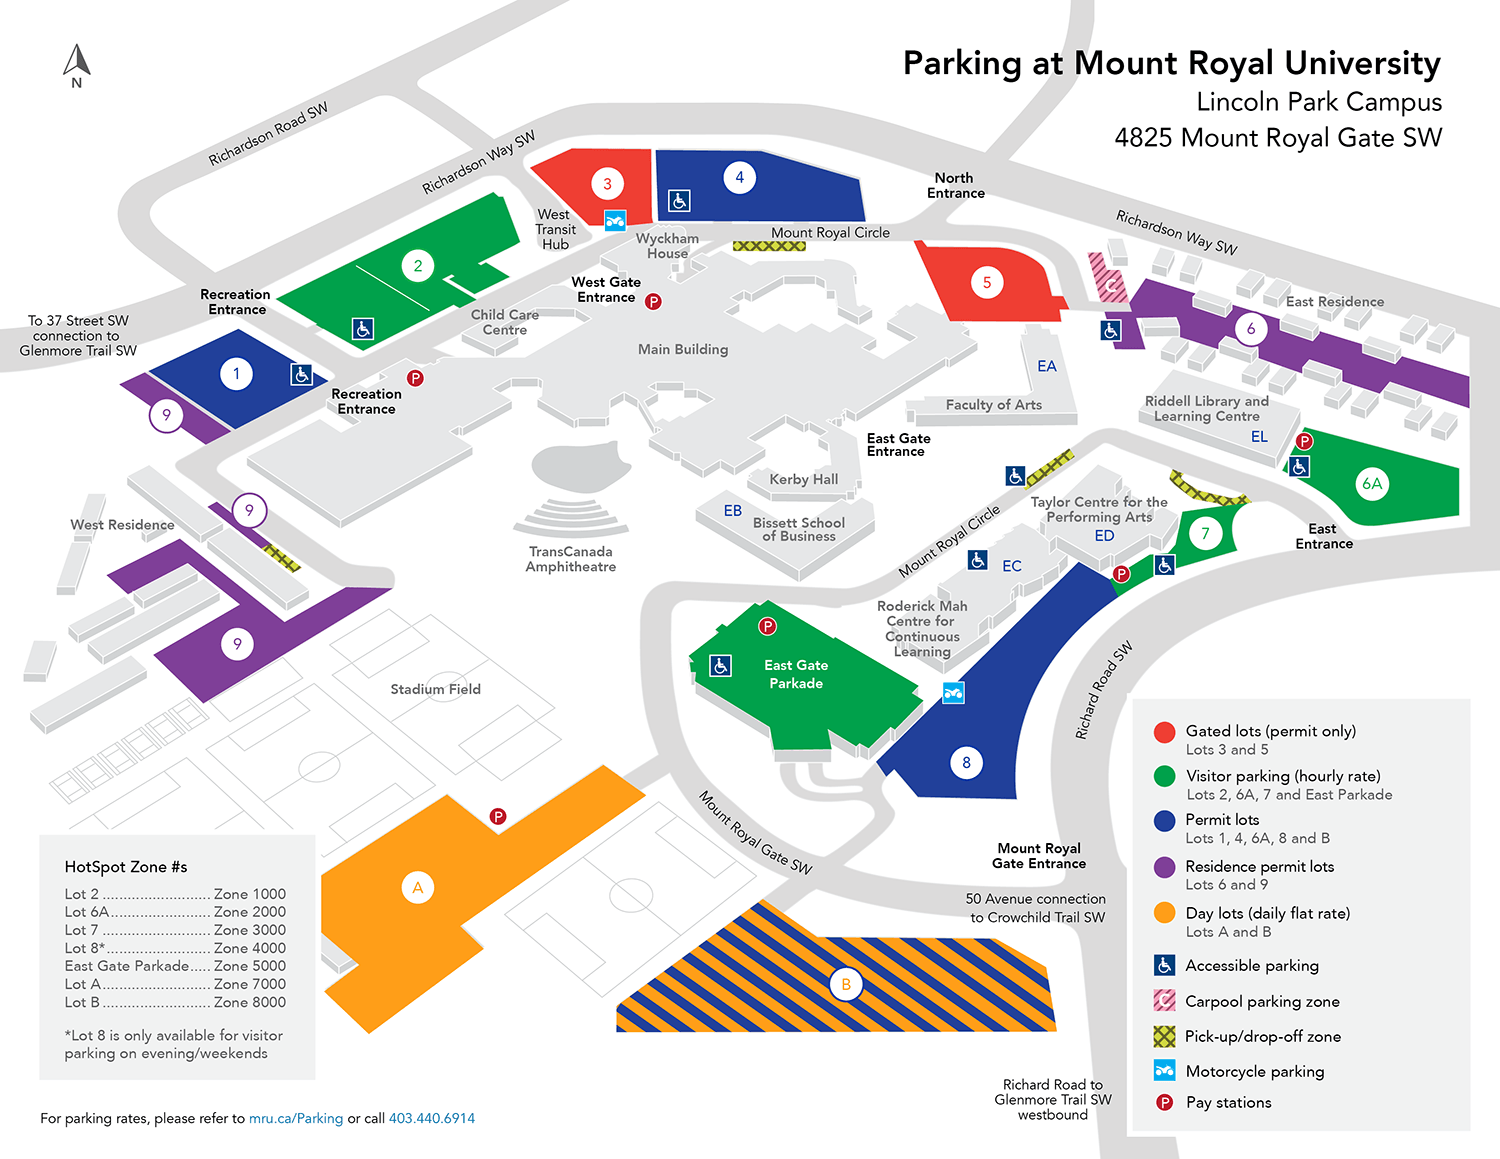 Parking map of campus